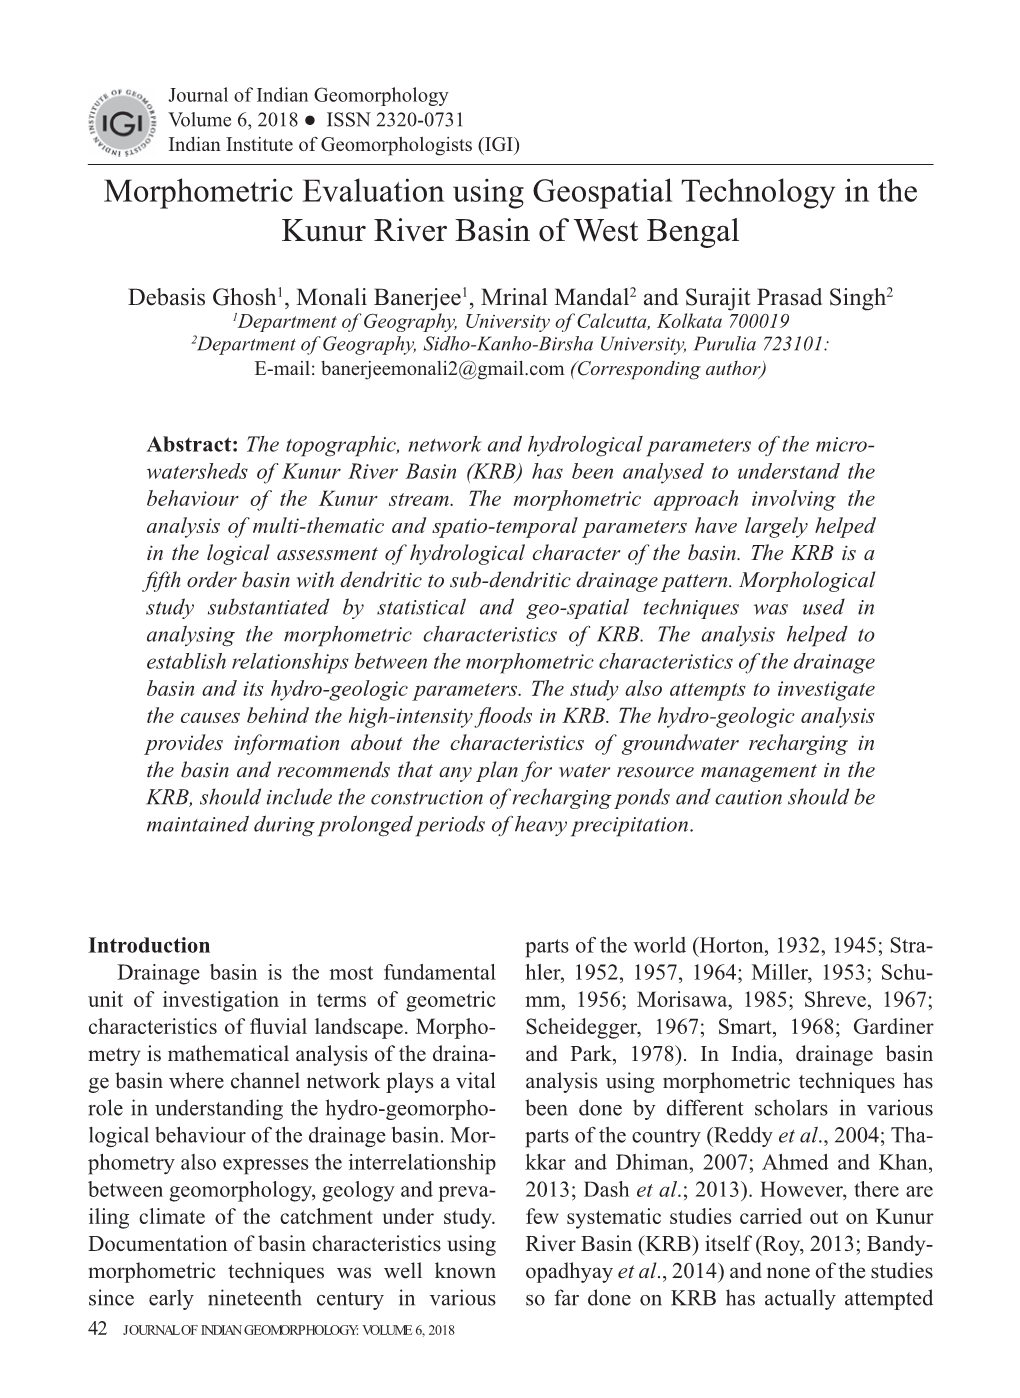 Morphometric Evaluation Using Geospatial Technology in the Kunur River Basin of West Bengal